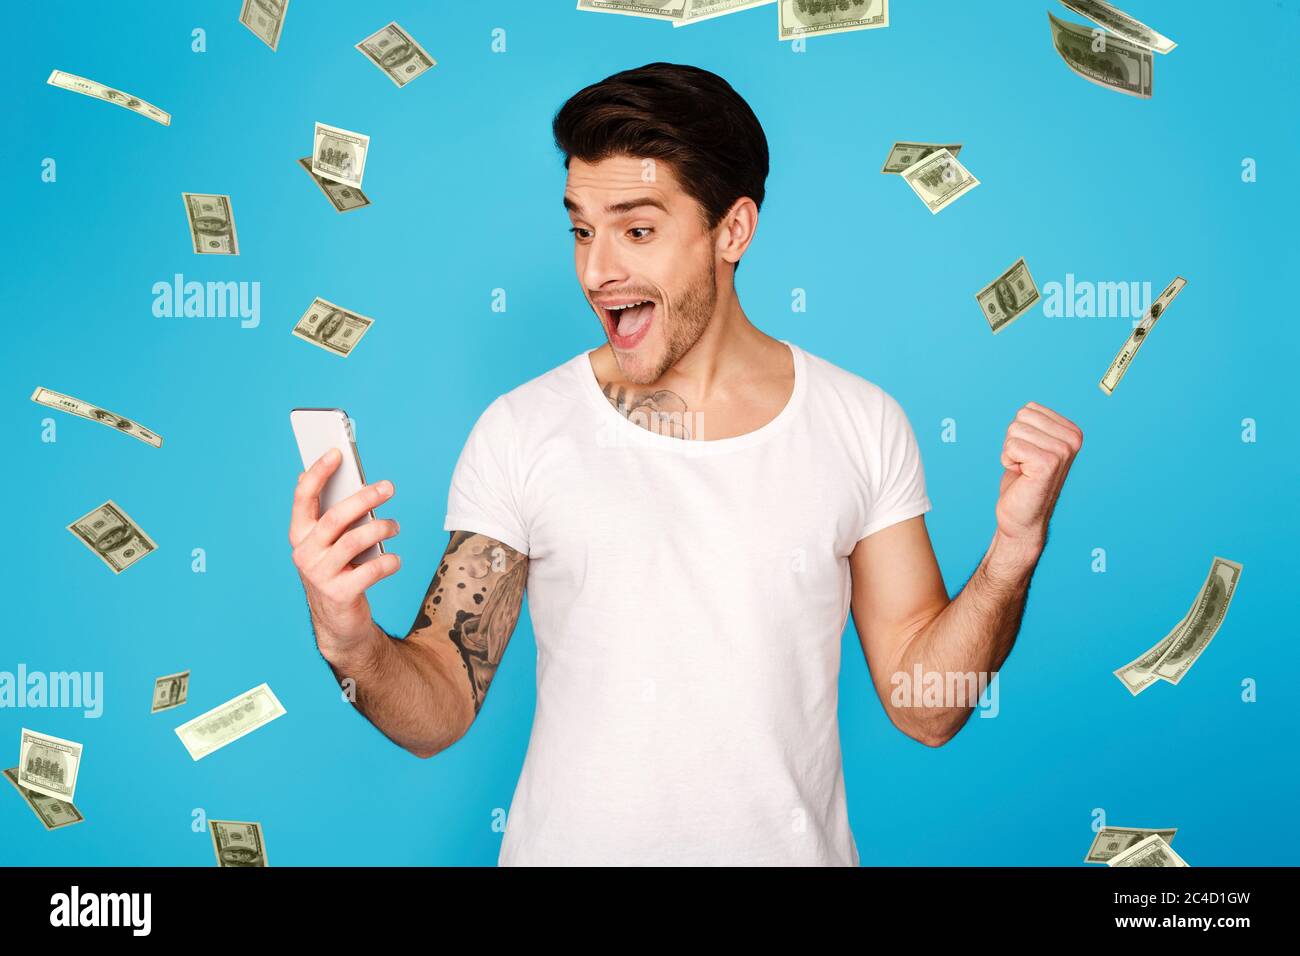 Lucky Winner. Excited Man With Smartphone Screaming With Joy Under Money Shower Stock Photo